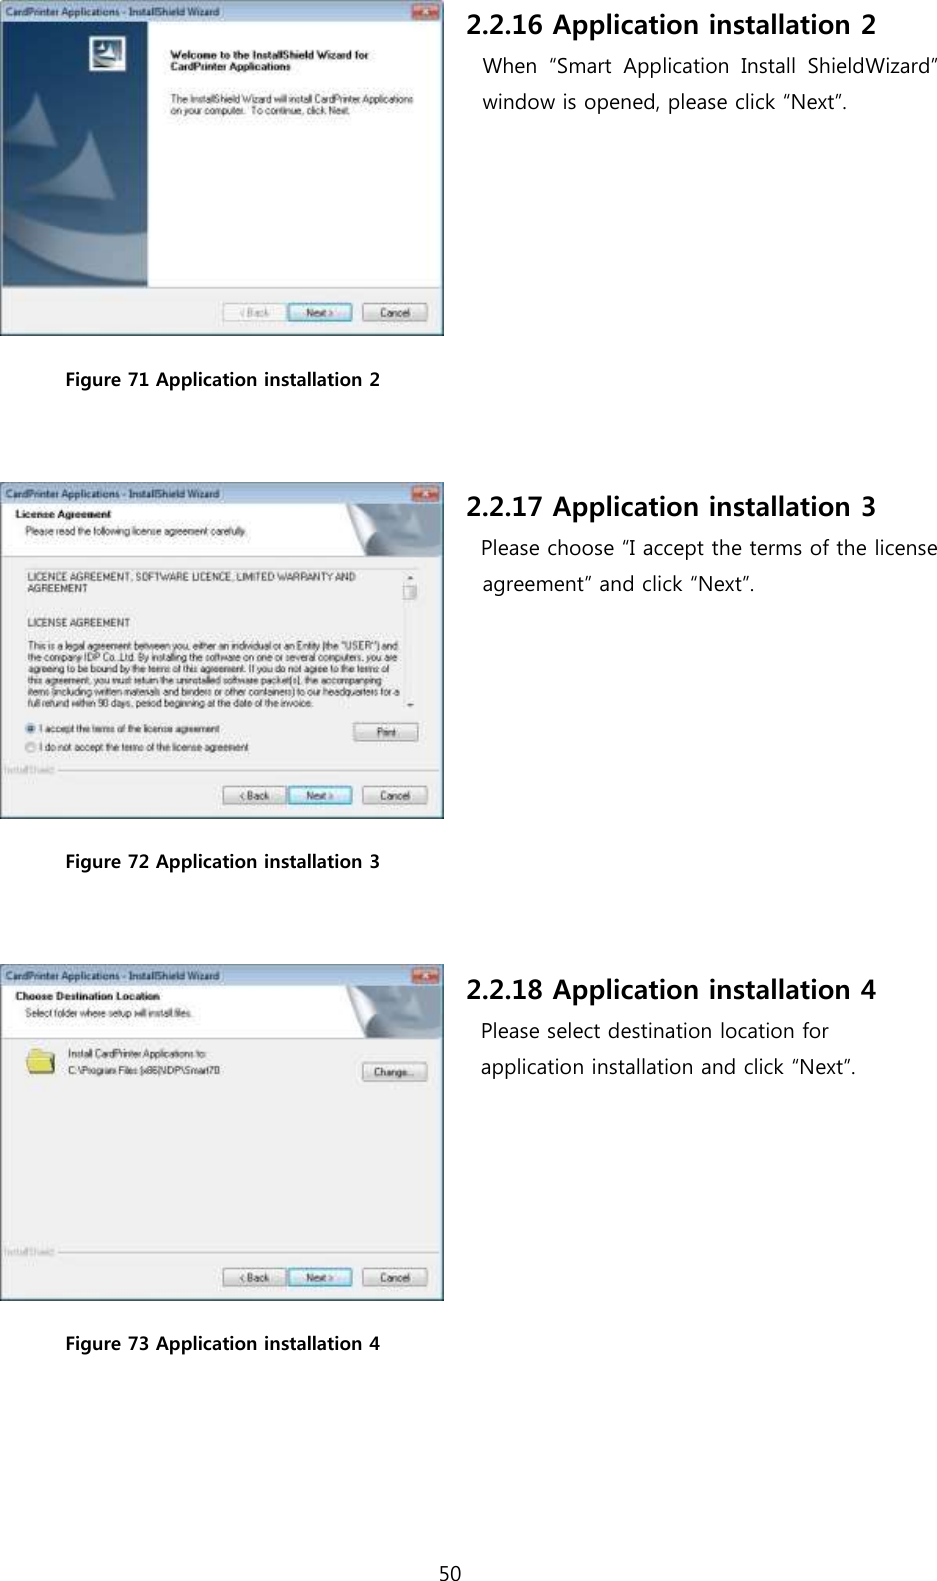 50   Figure 71 Application installation 2  2.2.16 Application installation 2 When  “Smart  Application  Install  ShieldWizard” window is opened, please click “Next”.  Figure 72 Application installation 3  2.2.17 Application installation 3 Please choose “I accept the terms of the license agreement” and click “Next”.  Figure 73 Application installation 4 2.2.18 Application installation 4 Please select destination location for   application installation and click “Next”.   